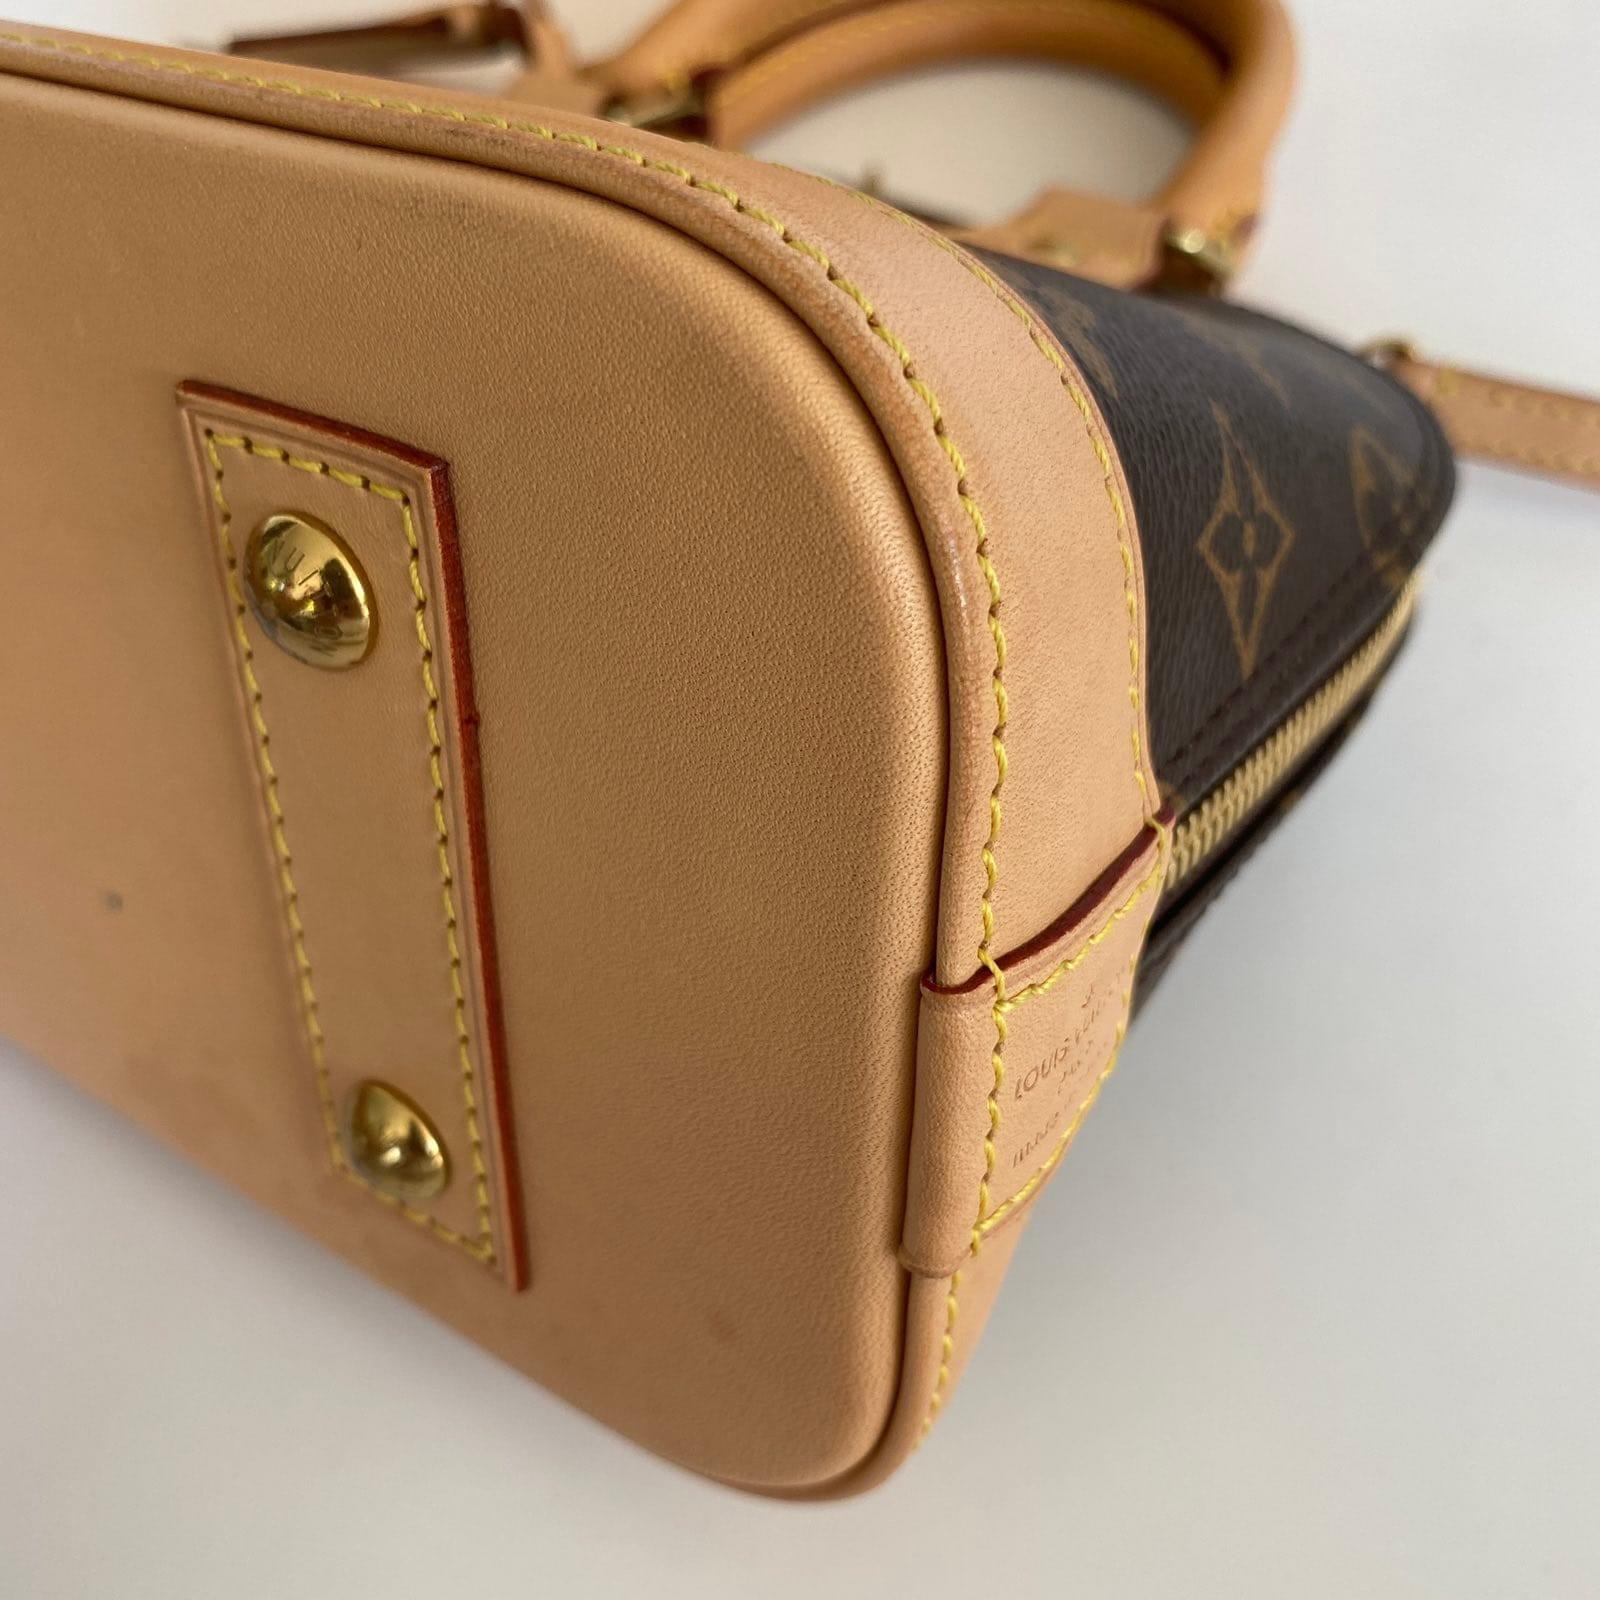 Feeling crazy but I cannot find a date code on my new Alma bb : r/ Louisvuitton